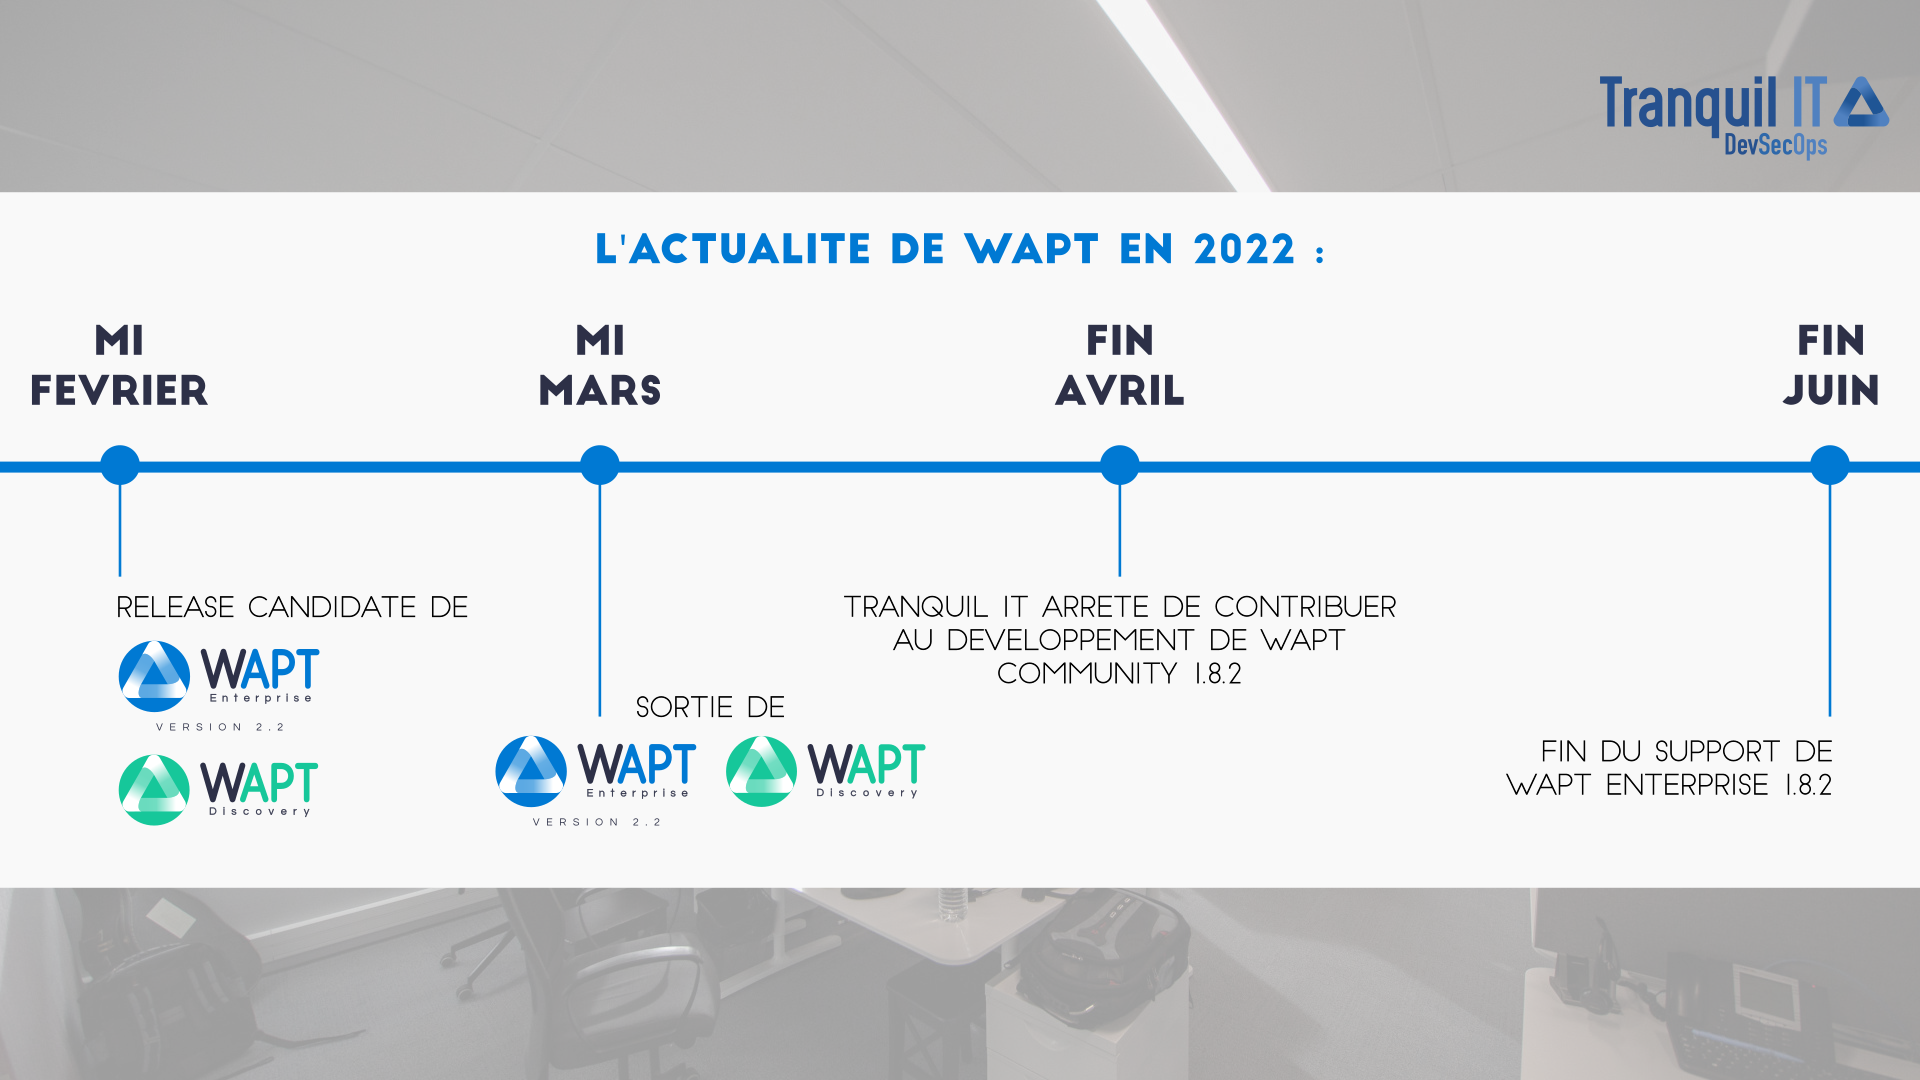 Timeline of WAPT news in 2022